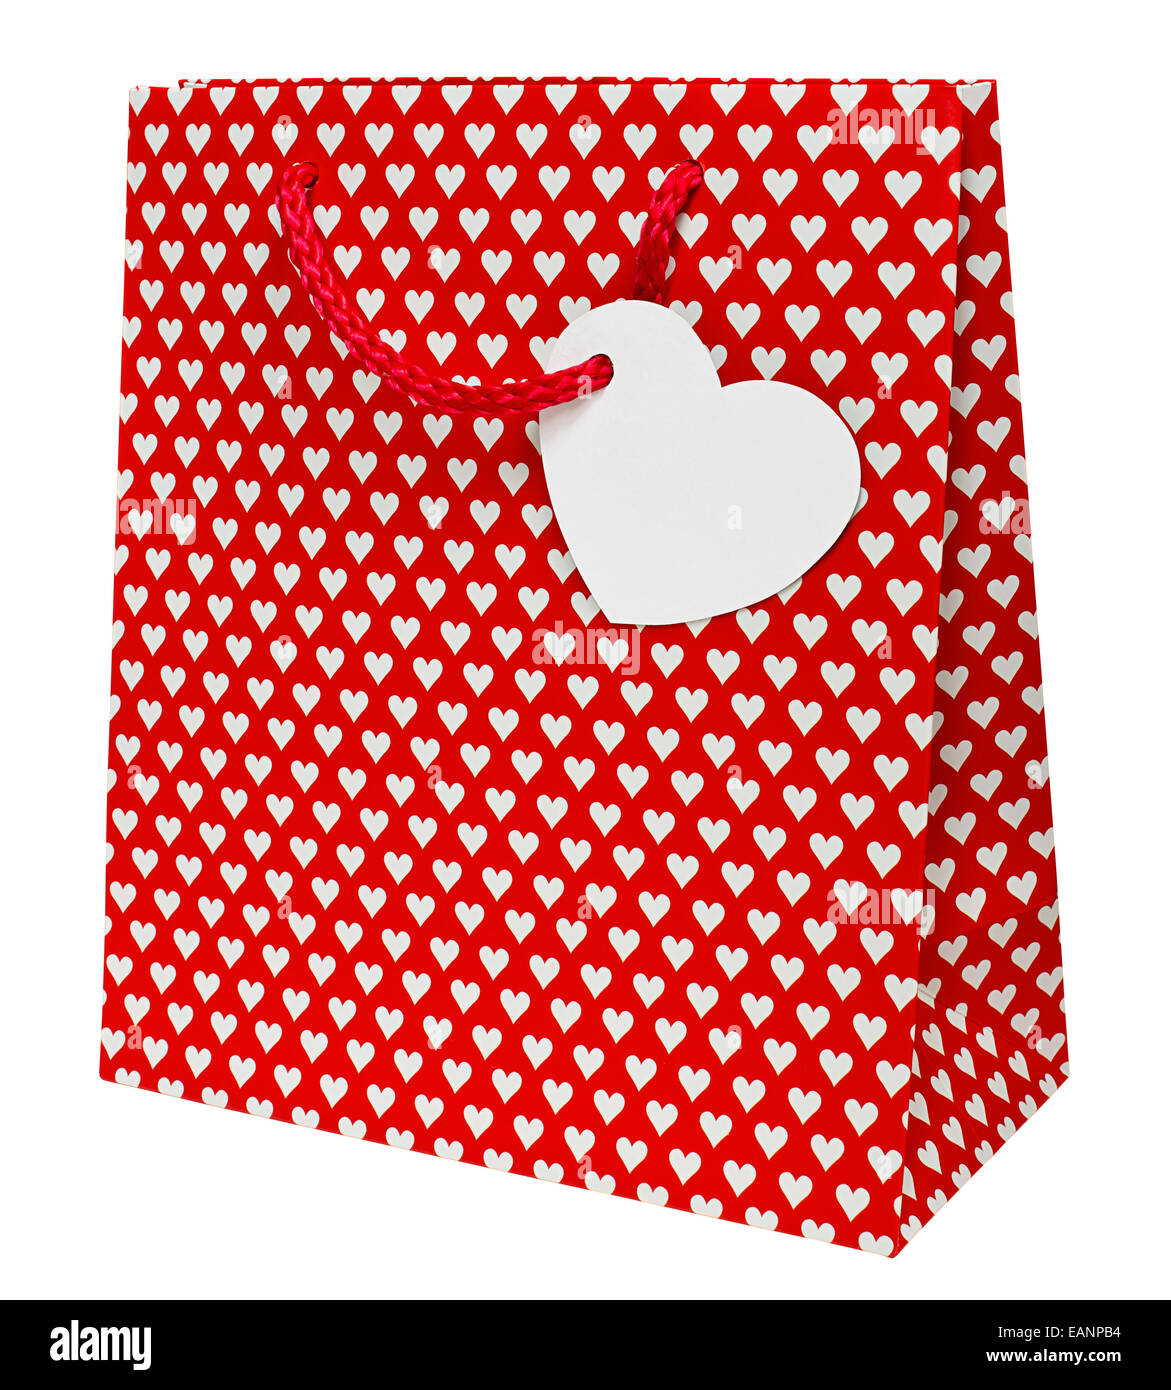 Valentines day gift bag decorated with heart shapes the perfect wrapping for that special preent for your loved one. Stock Photo